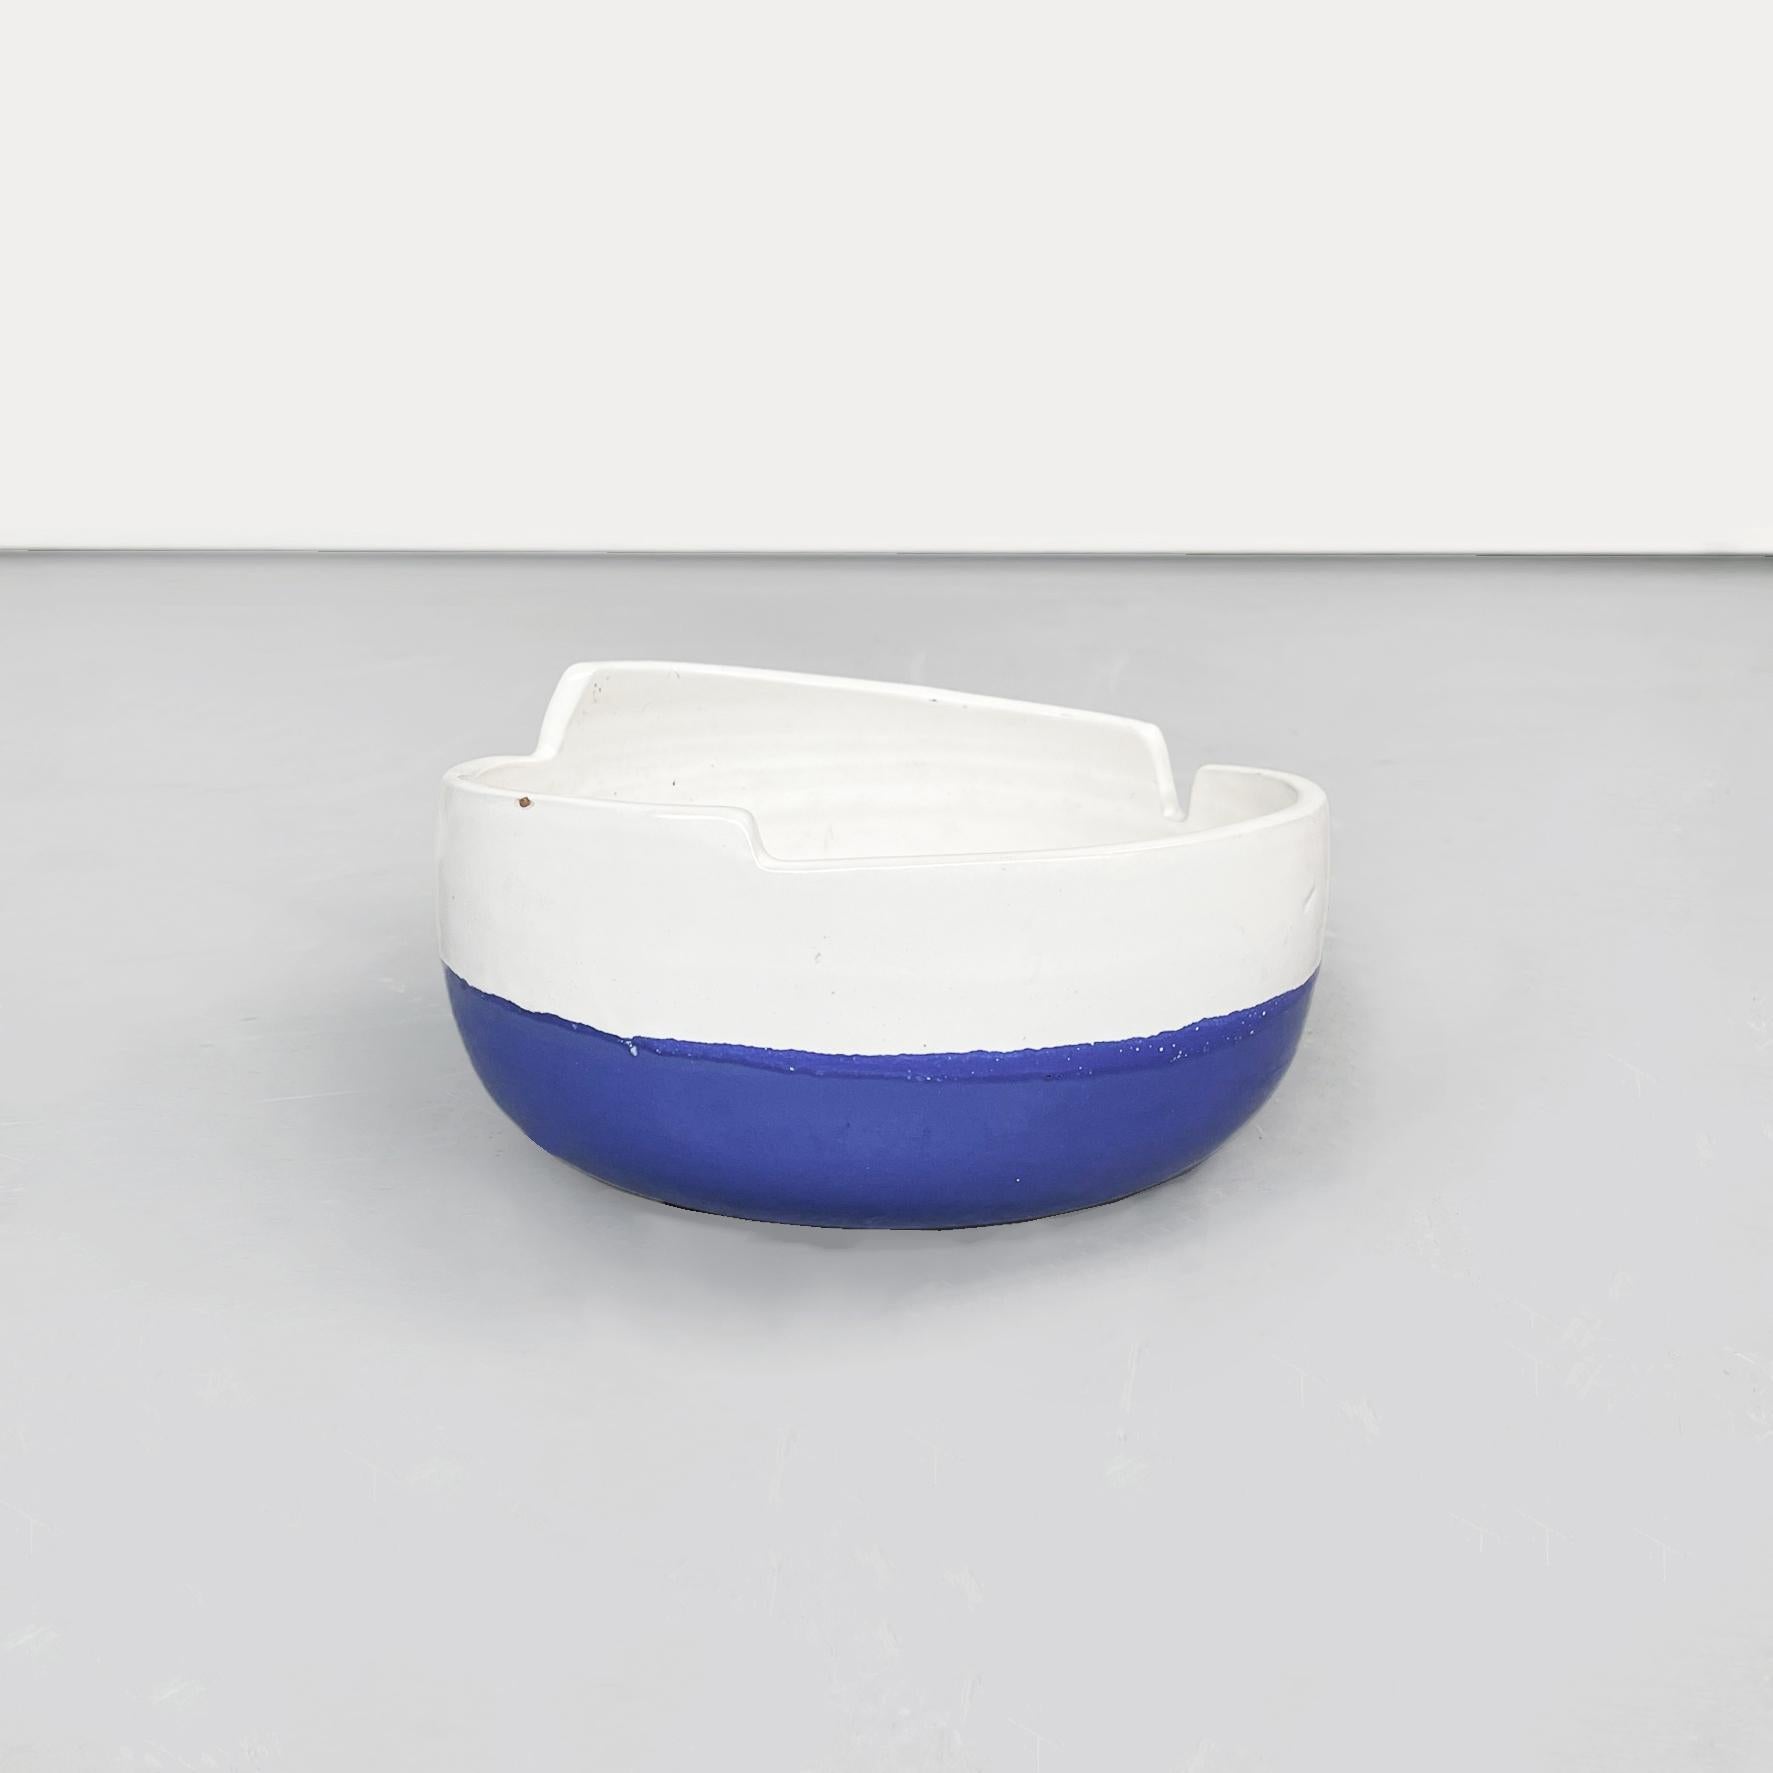 Italian mid-century round bowl in glazed ceramic blue n white by Sottsass, 1980s
Round bowl with irregular edge in glazed ceramic in white on the top and blue on the bottom.
Produced and designed by Ettore Sottsass in 1980s. Belonging to the